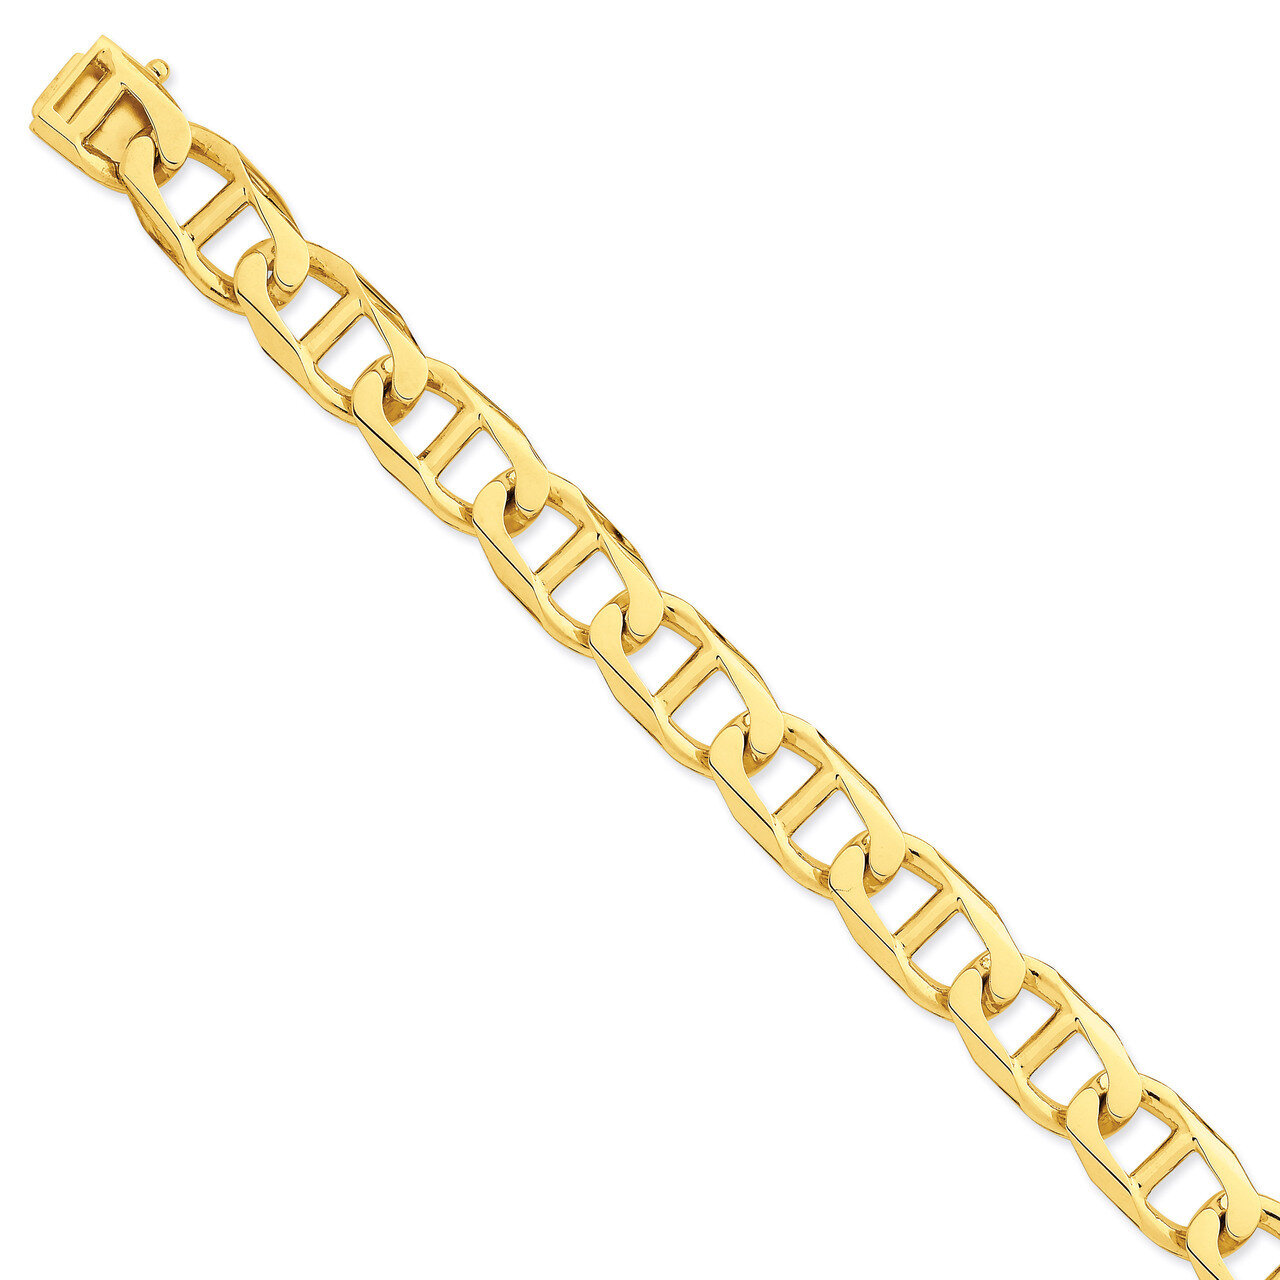 13mm Hand-Polished Anchor Link Chain 24 Inch 14k Gold LK103-24